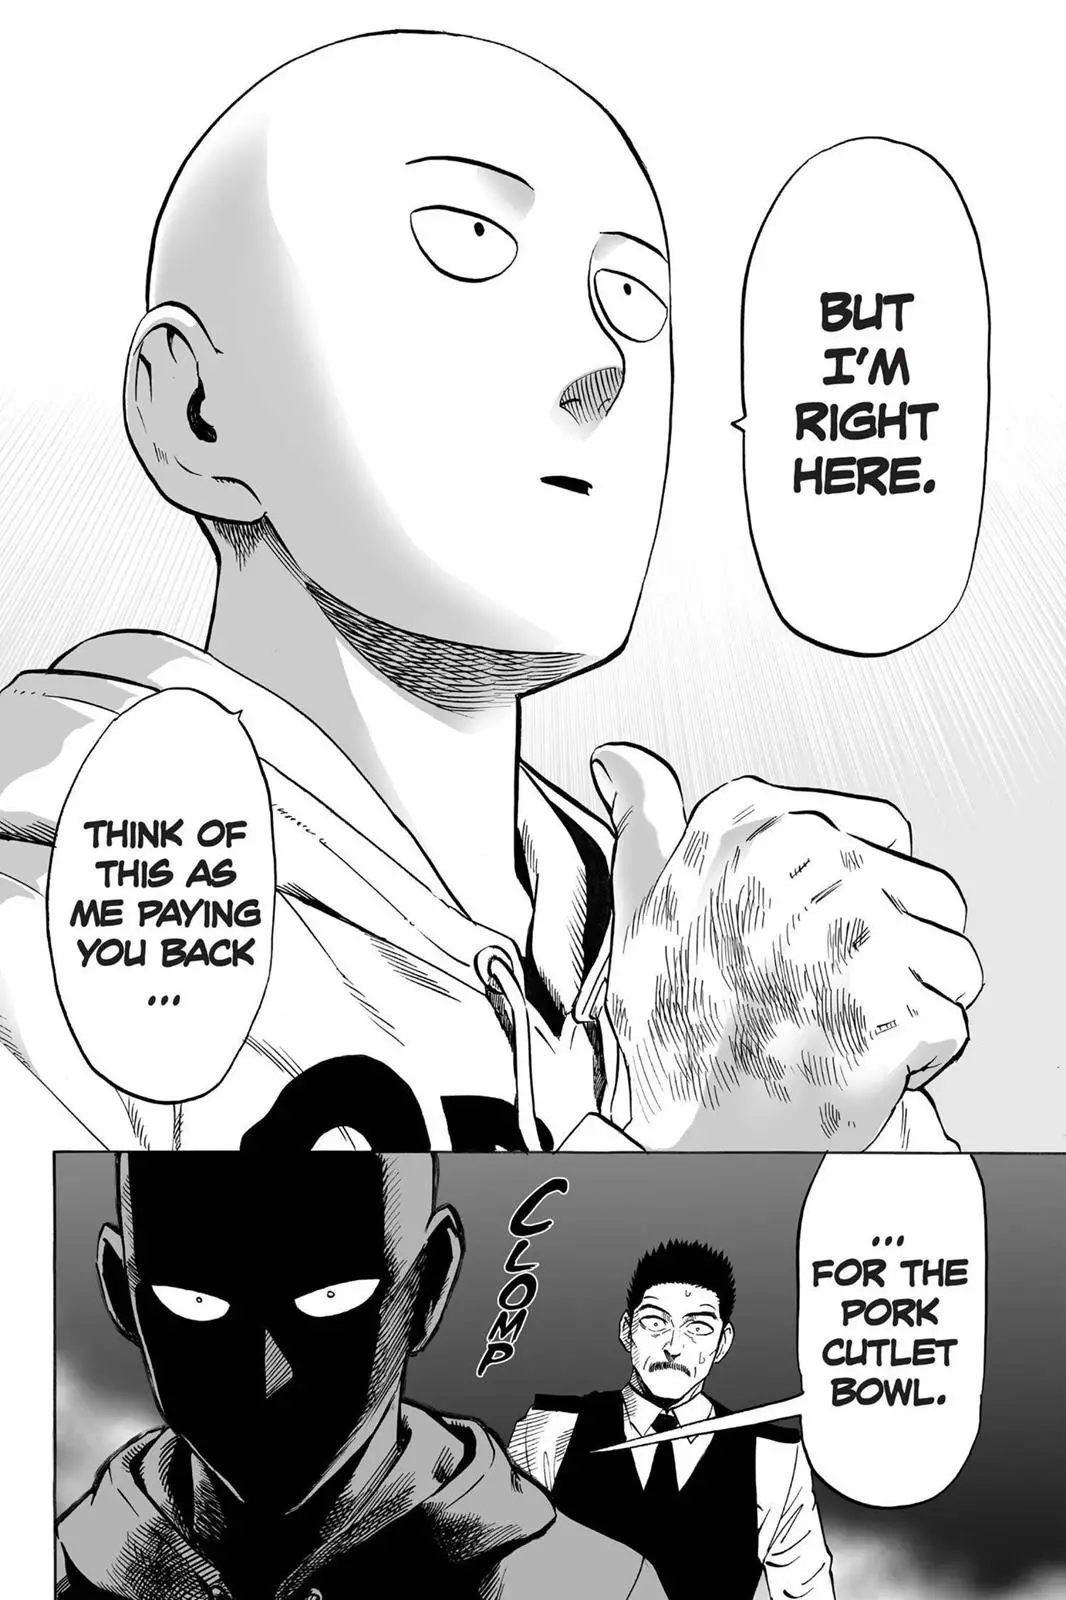 One Punch Man Chapter 37.7, READ One Punch Man Chapter 37.7 ONLINE, lost in the cloud genre,lost in the cloud gif,lost in the cloud girl,lost in the cloud goods,lost in the cloud goodreads,lost in the cloud,lost ark cloud gaming,lost odyssey cloud gaming,lost in the cloud fanart,lost in the cloud fanfic,lost in the cloud fandom,lost in the cloud first kiss,lost in the cloud font,lost in the cloud ending,lost in the cloud episode 97,lost in the cloud edit,lost in the cloud explained,lost in the cloud dog,lost in the cloud discord server,lost in the cloud desktop wallpaper,lost in the cloud drawing,can't find my cloud on network,lost in the cloud characters,lost in the cloud chapter 93 release date,lost in the cloud birthday,lost in the cloud birthday art,lost in the cloud background,lost in the cloud banner,lost in the clouds meaning,what is the black cloud in lost,lost in the cloud ao3,lost in the cloud anime,lost in the cloud art,lost in the cloud author twitter,lost in the cloud author instagram,lost in the cloud artist,lost in the cloud acrylic stand,lost in the cloud artist twitter,lost in the cloud art style,lost in the cloud analysis